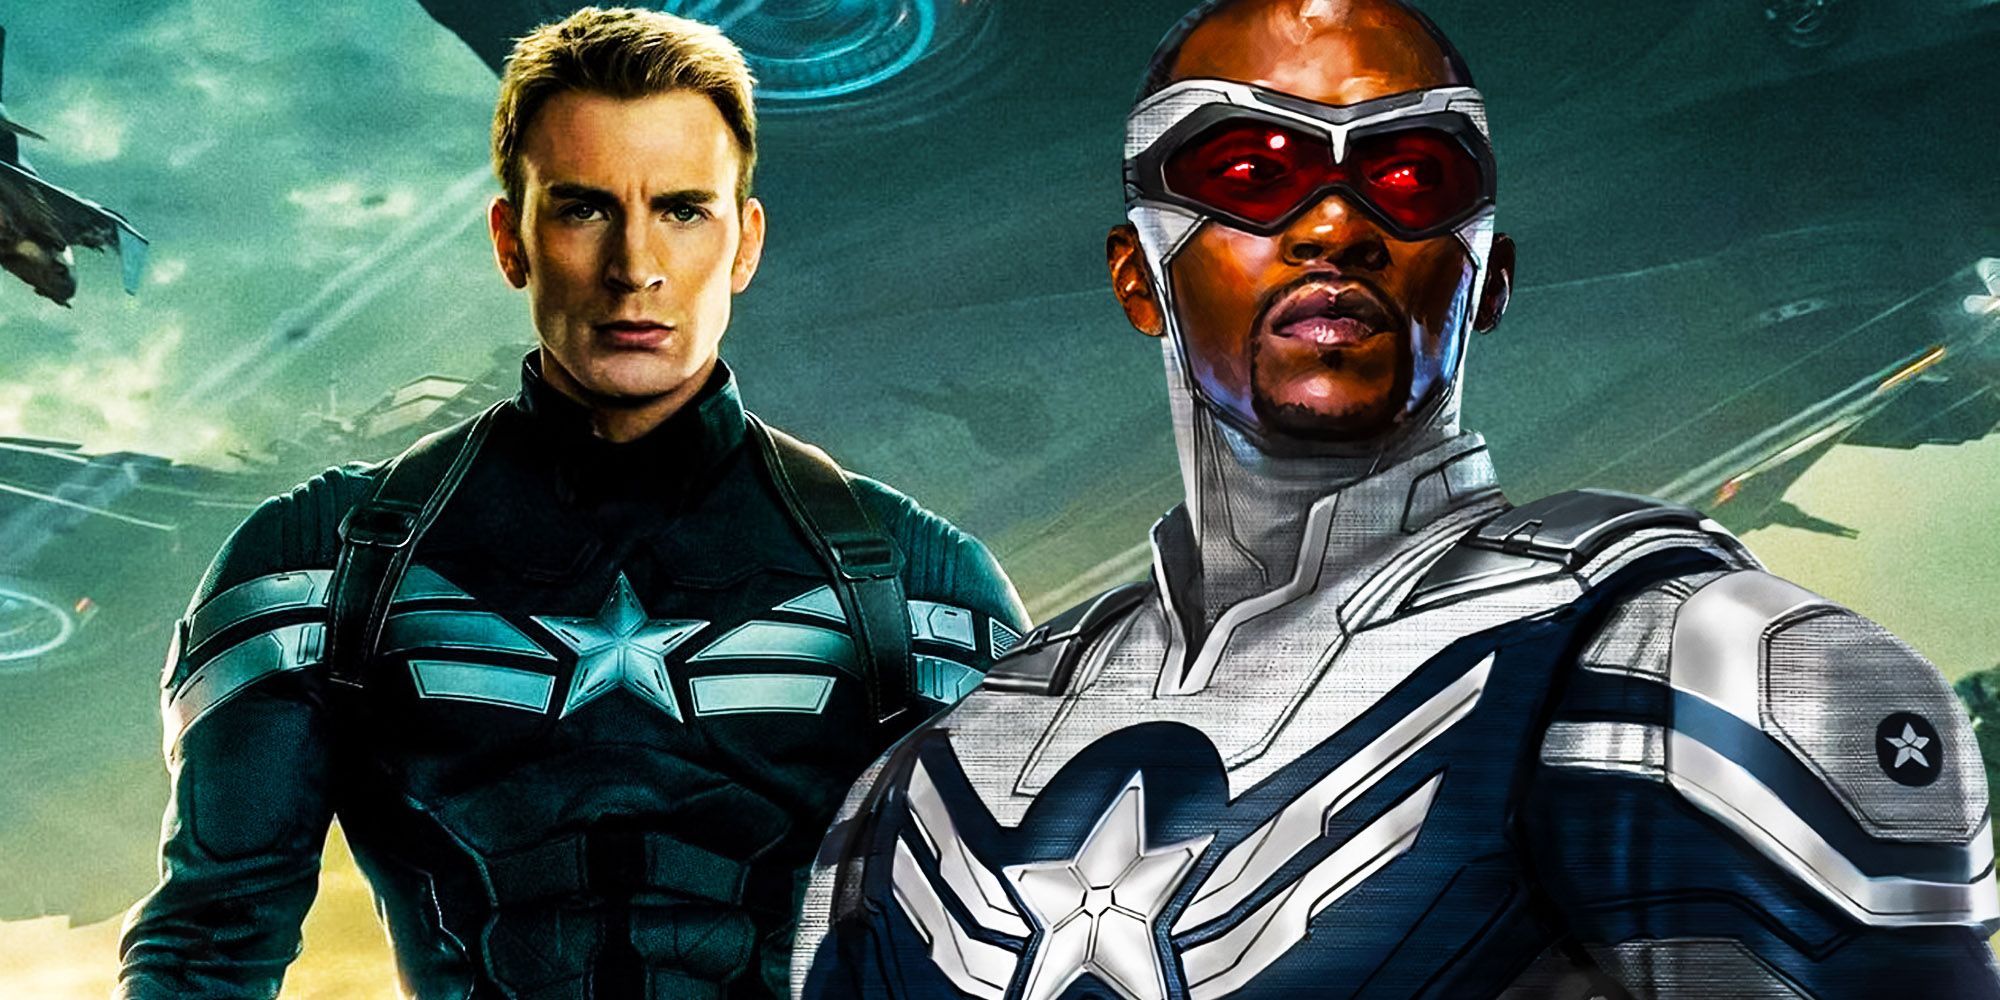 Montage of Steve Rogers in his stealth suit with Sam Wilson by his side in his white Captain America suit.